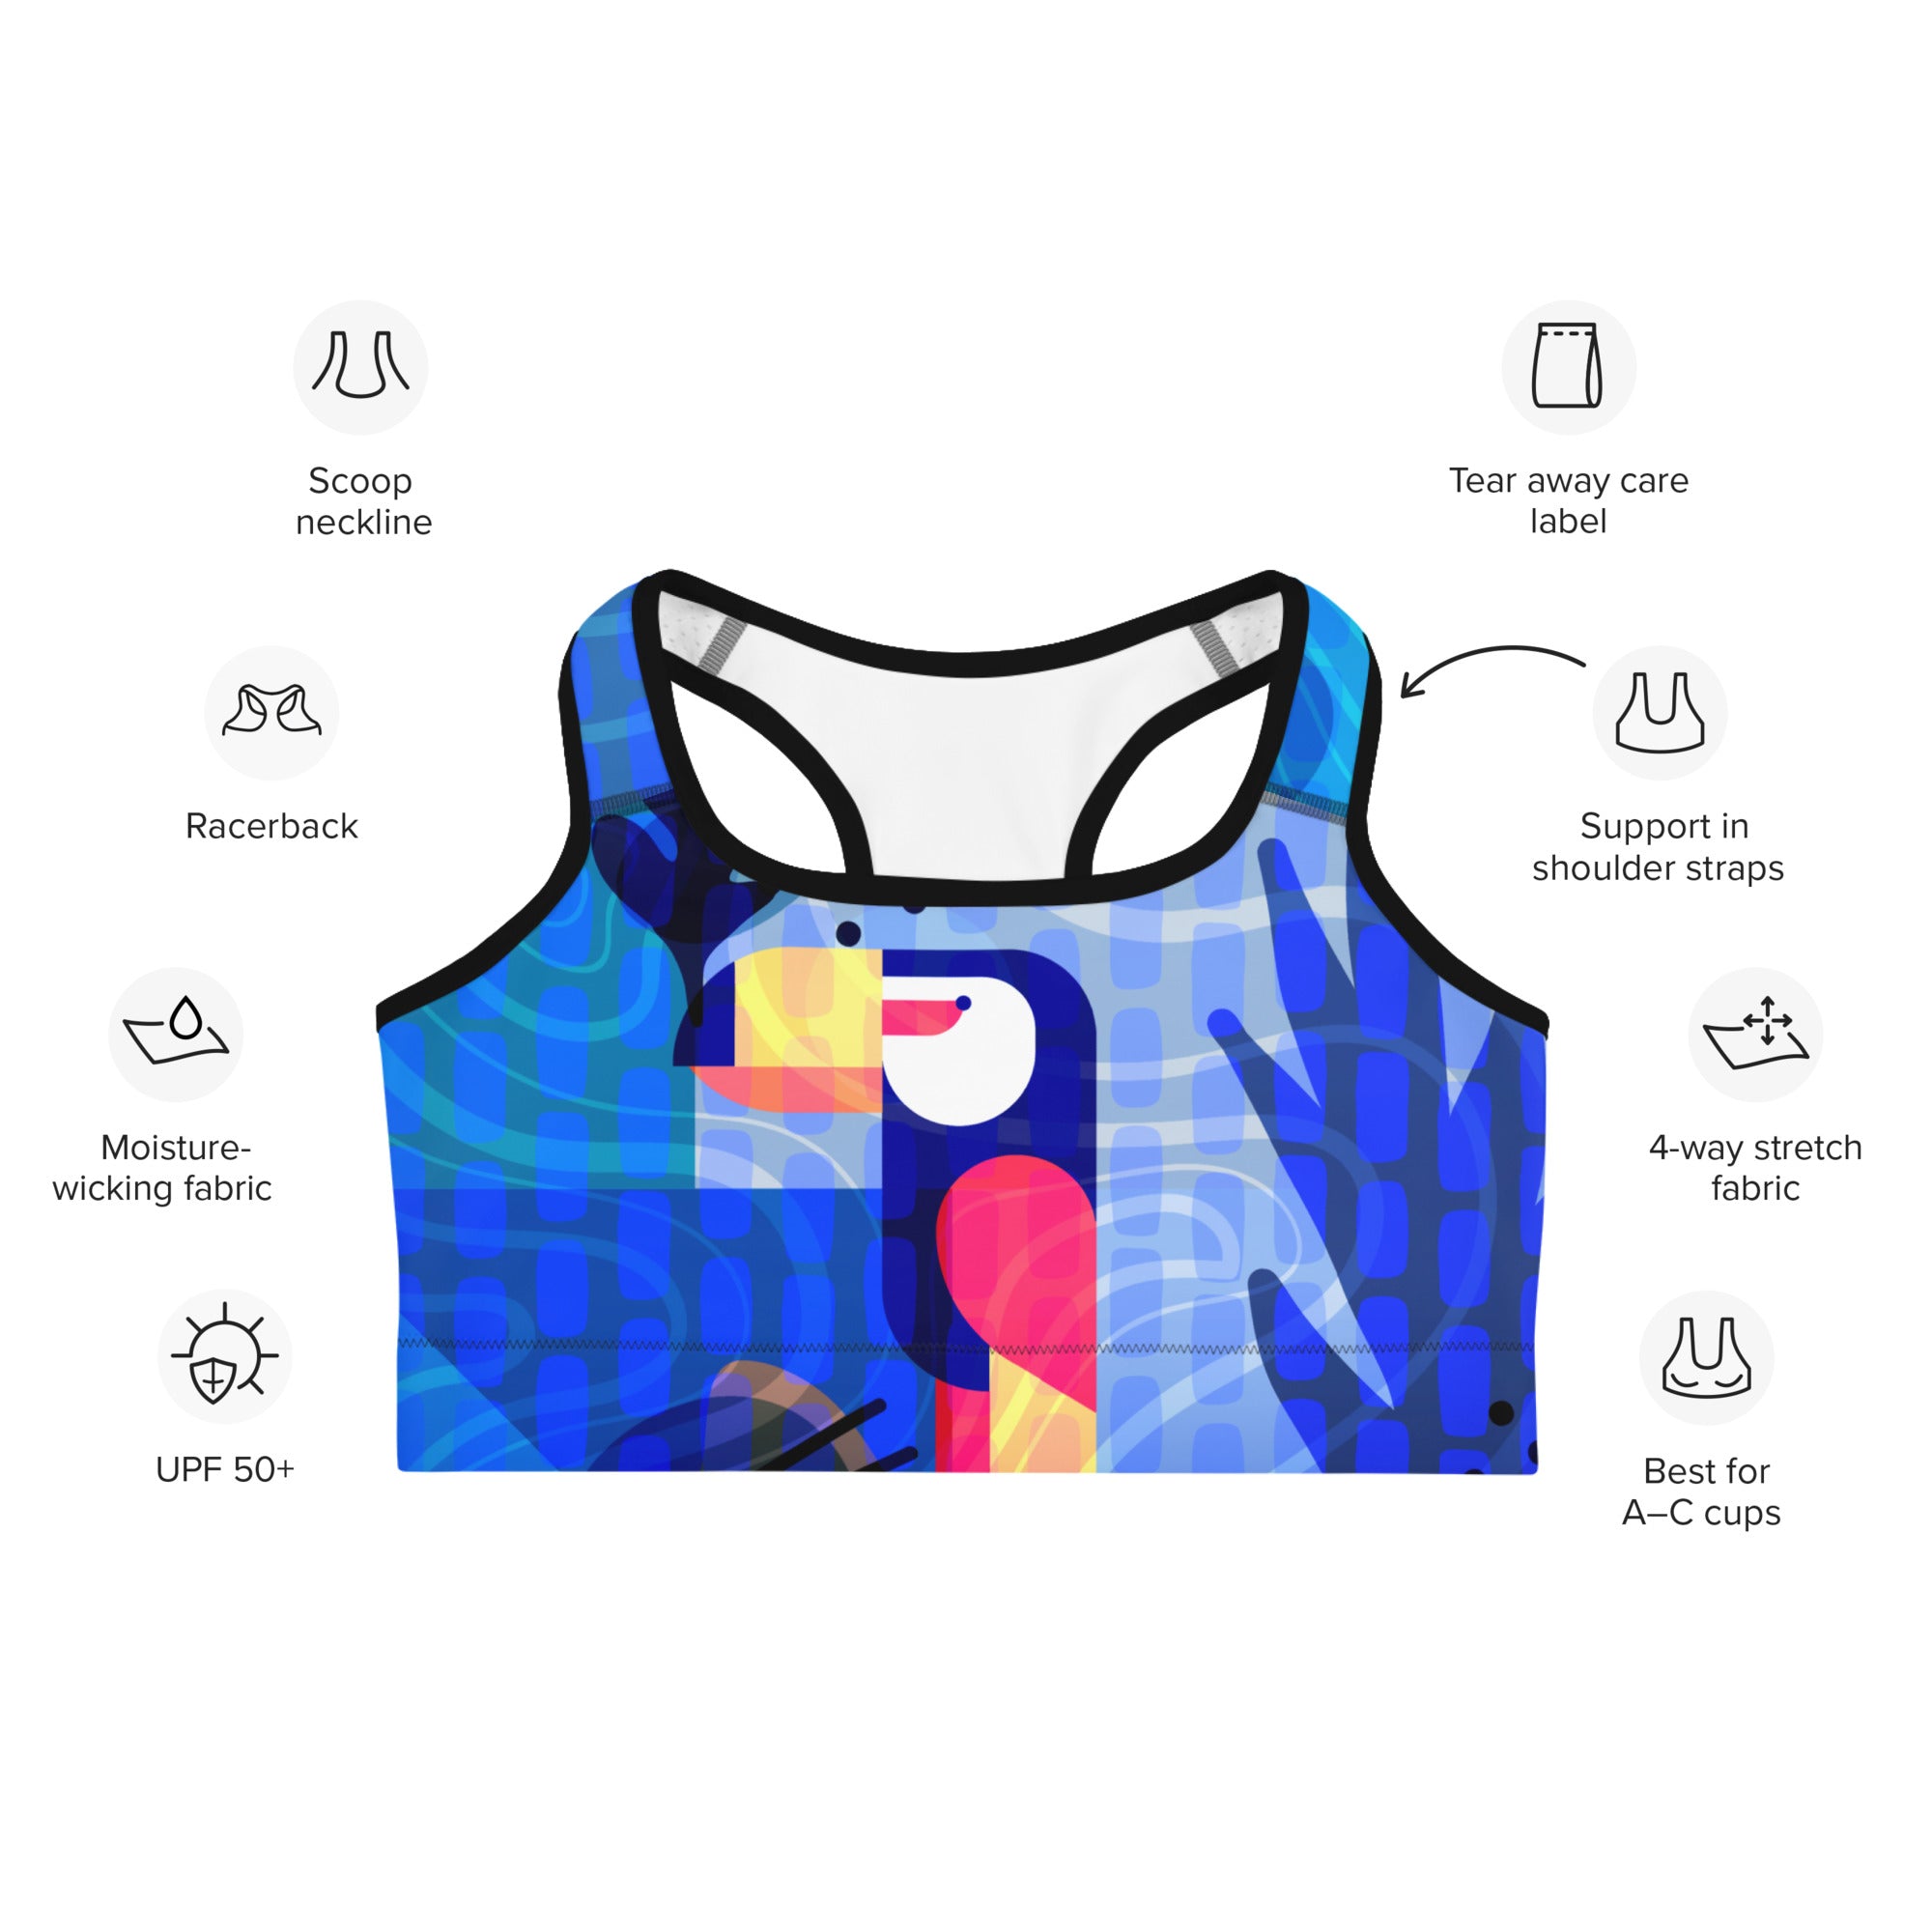 Blue Abstract Sports Bra